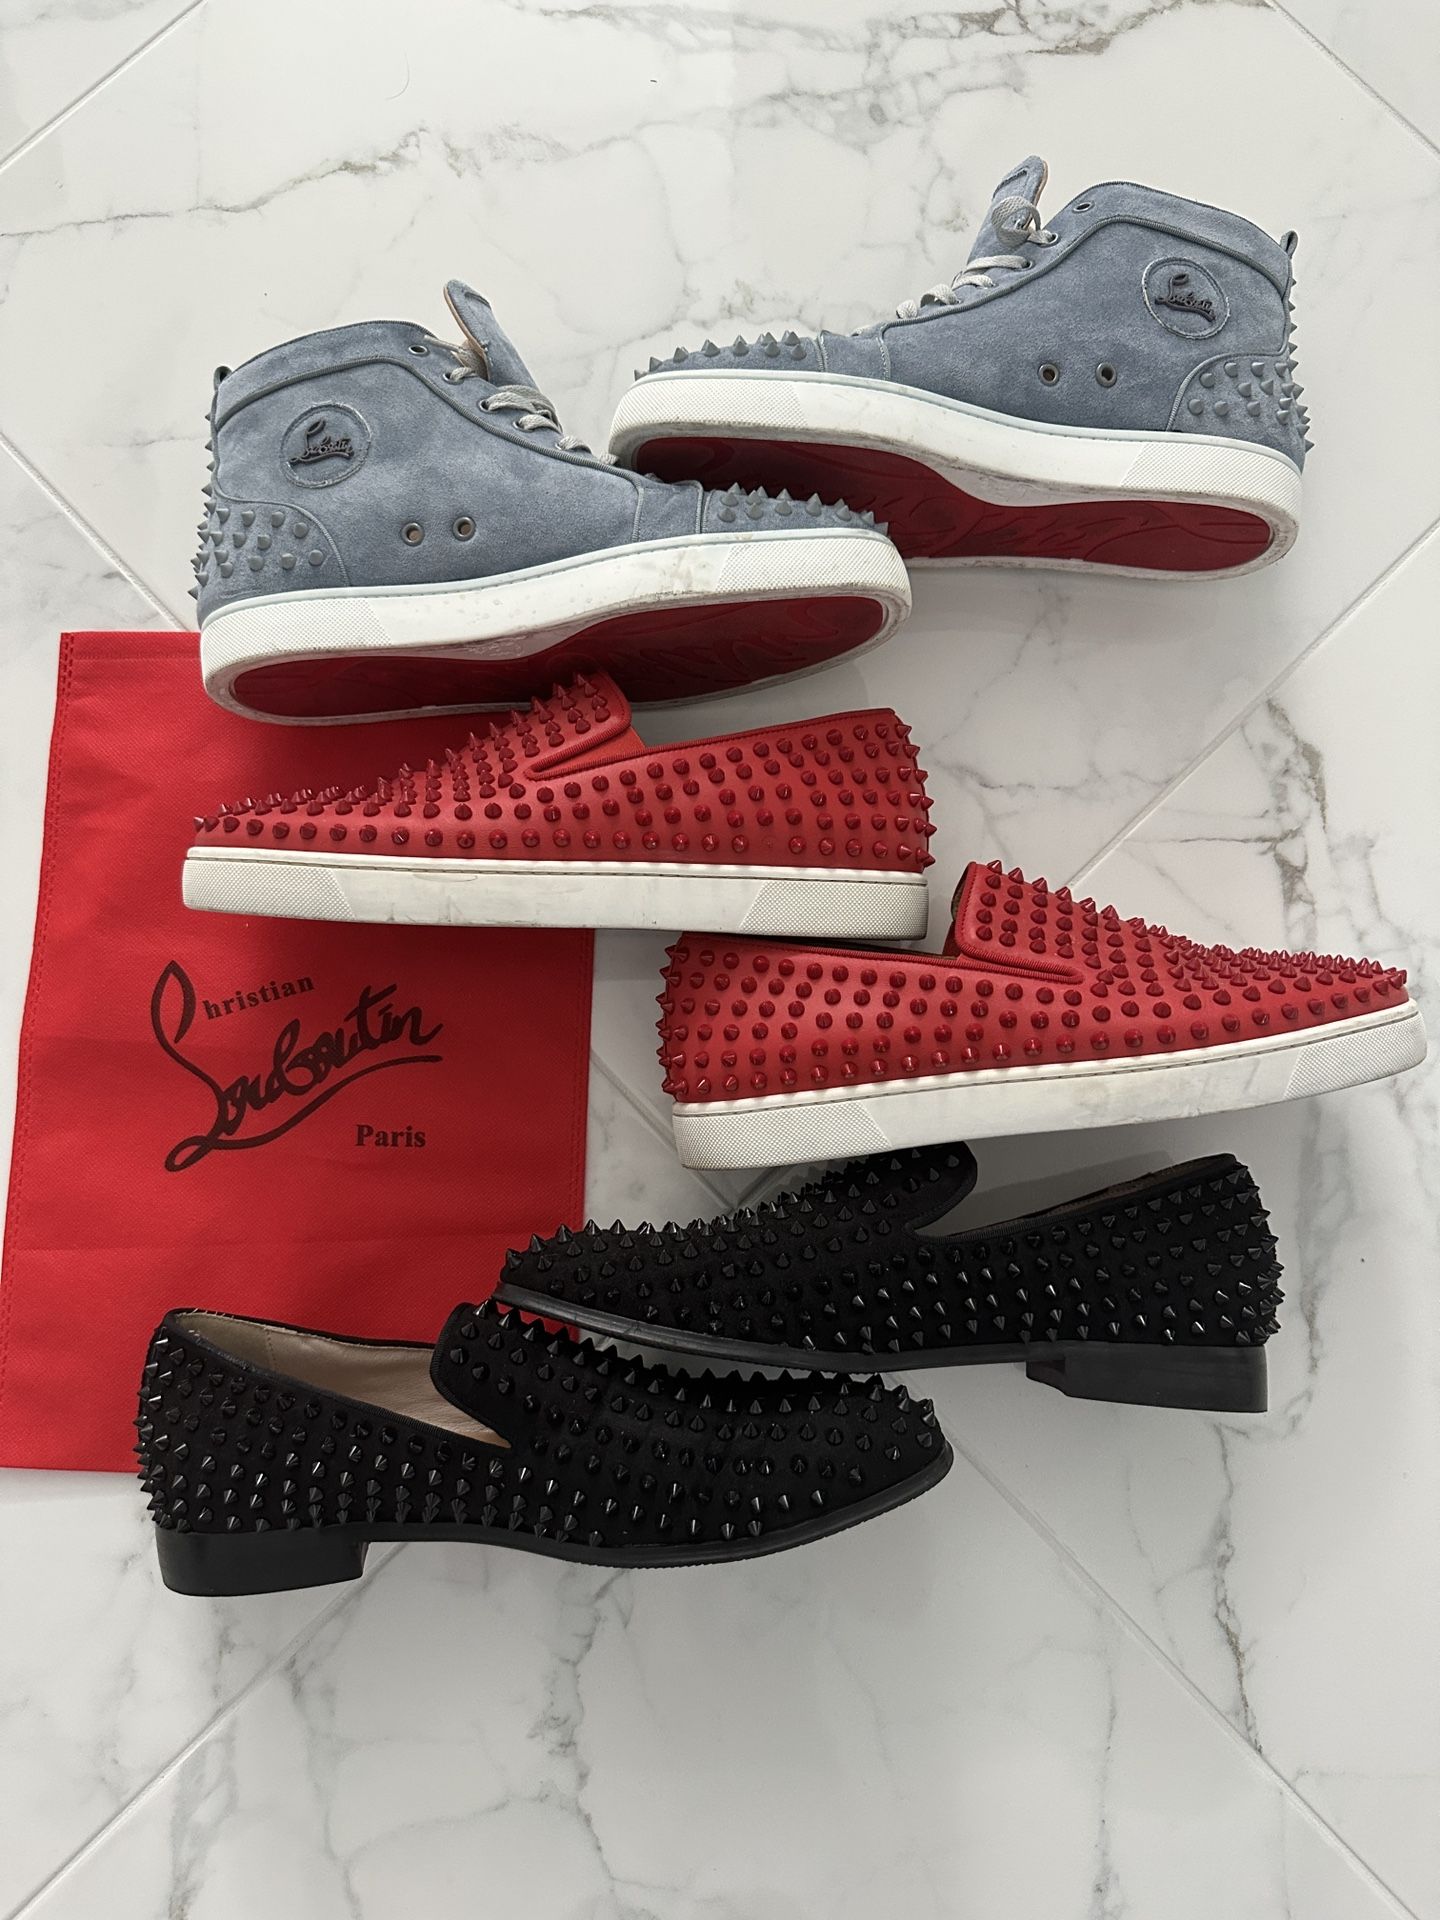 Christian Louboutin Shoes (3) Red Bottoms 